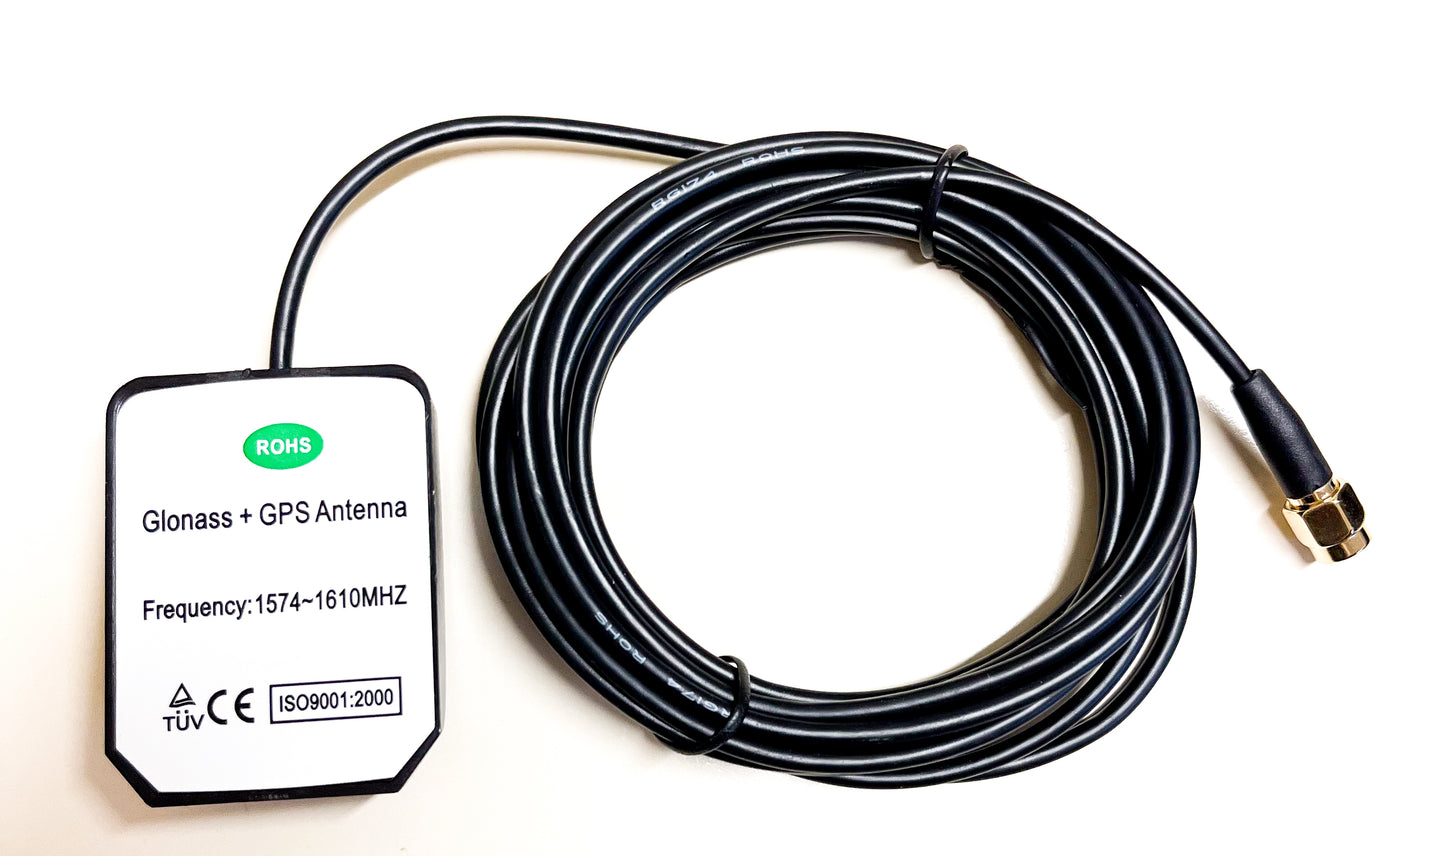 ACTIVE ANTENNA RECEIVER - HIGH PRECISION - GNSS (GPS and GLONASS)